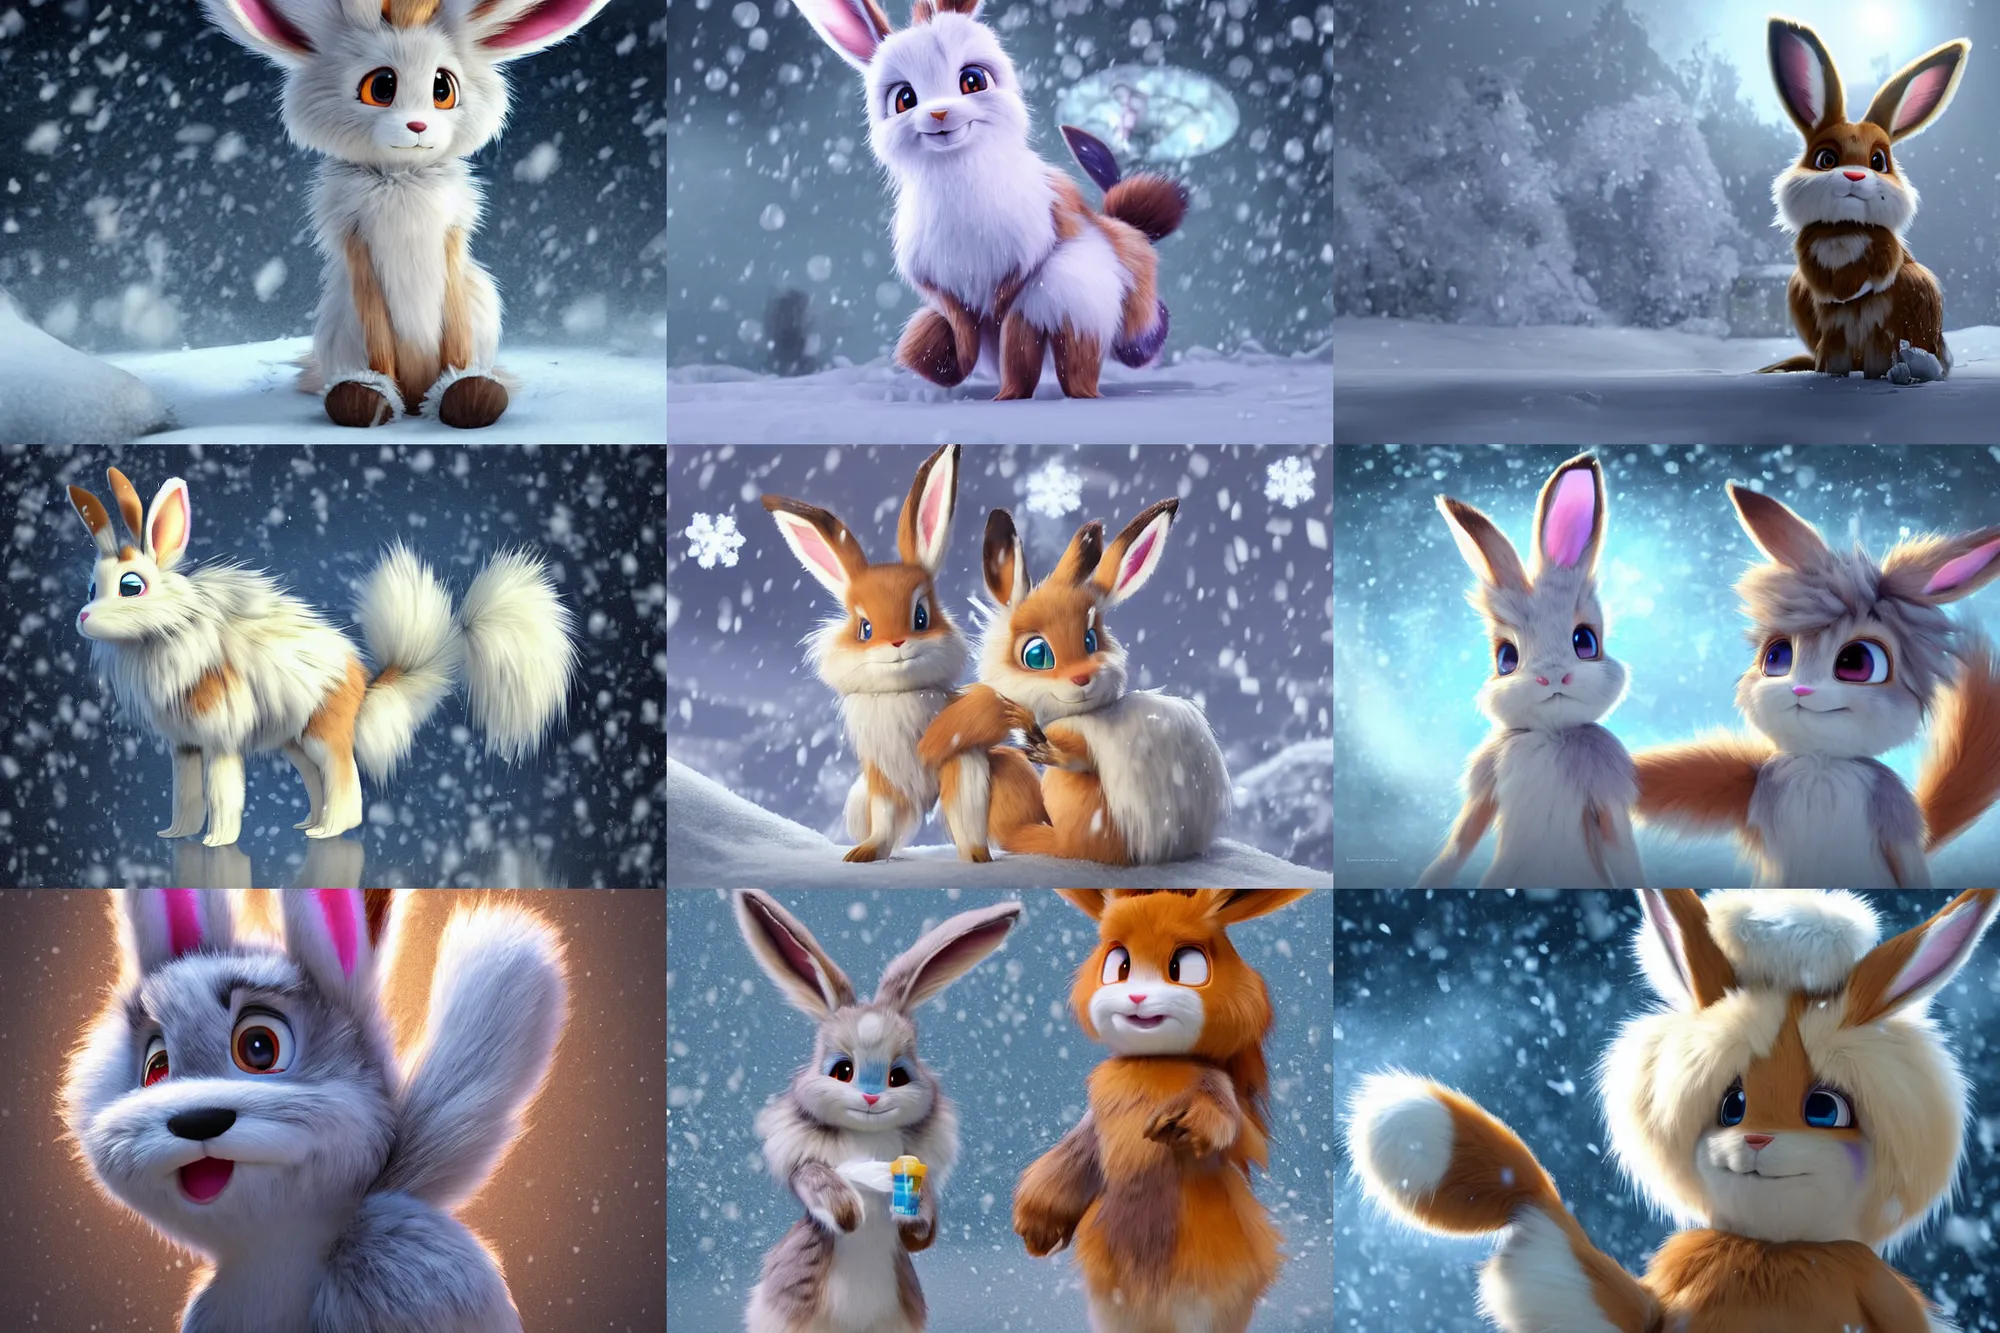 Prompt: fan art rendering of a bipedal frosty anthro fuzzy eevee evil comb sitting in snow eevee high resolution anthro eevee humanoid, CGsociety UHD 4K highly detailed, intricate heterochromatic sad, watery eyes with clawed finger in nose eevee anthro standing up two legs and two arms poofy synthetic fur tail bloody wet fur judy hopps frilled bow braided tail looking down bleeding eevee anthro tongue sticking out wearing glasses smiling in winter facing the moon zions national frozen high resolution maid dress humanoid braided furry long tail wearing converse shoes and hat holding cowboy whip